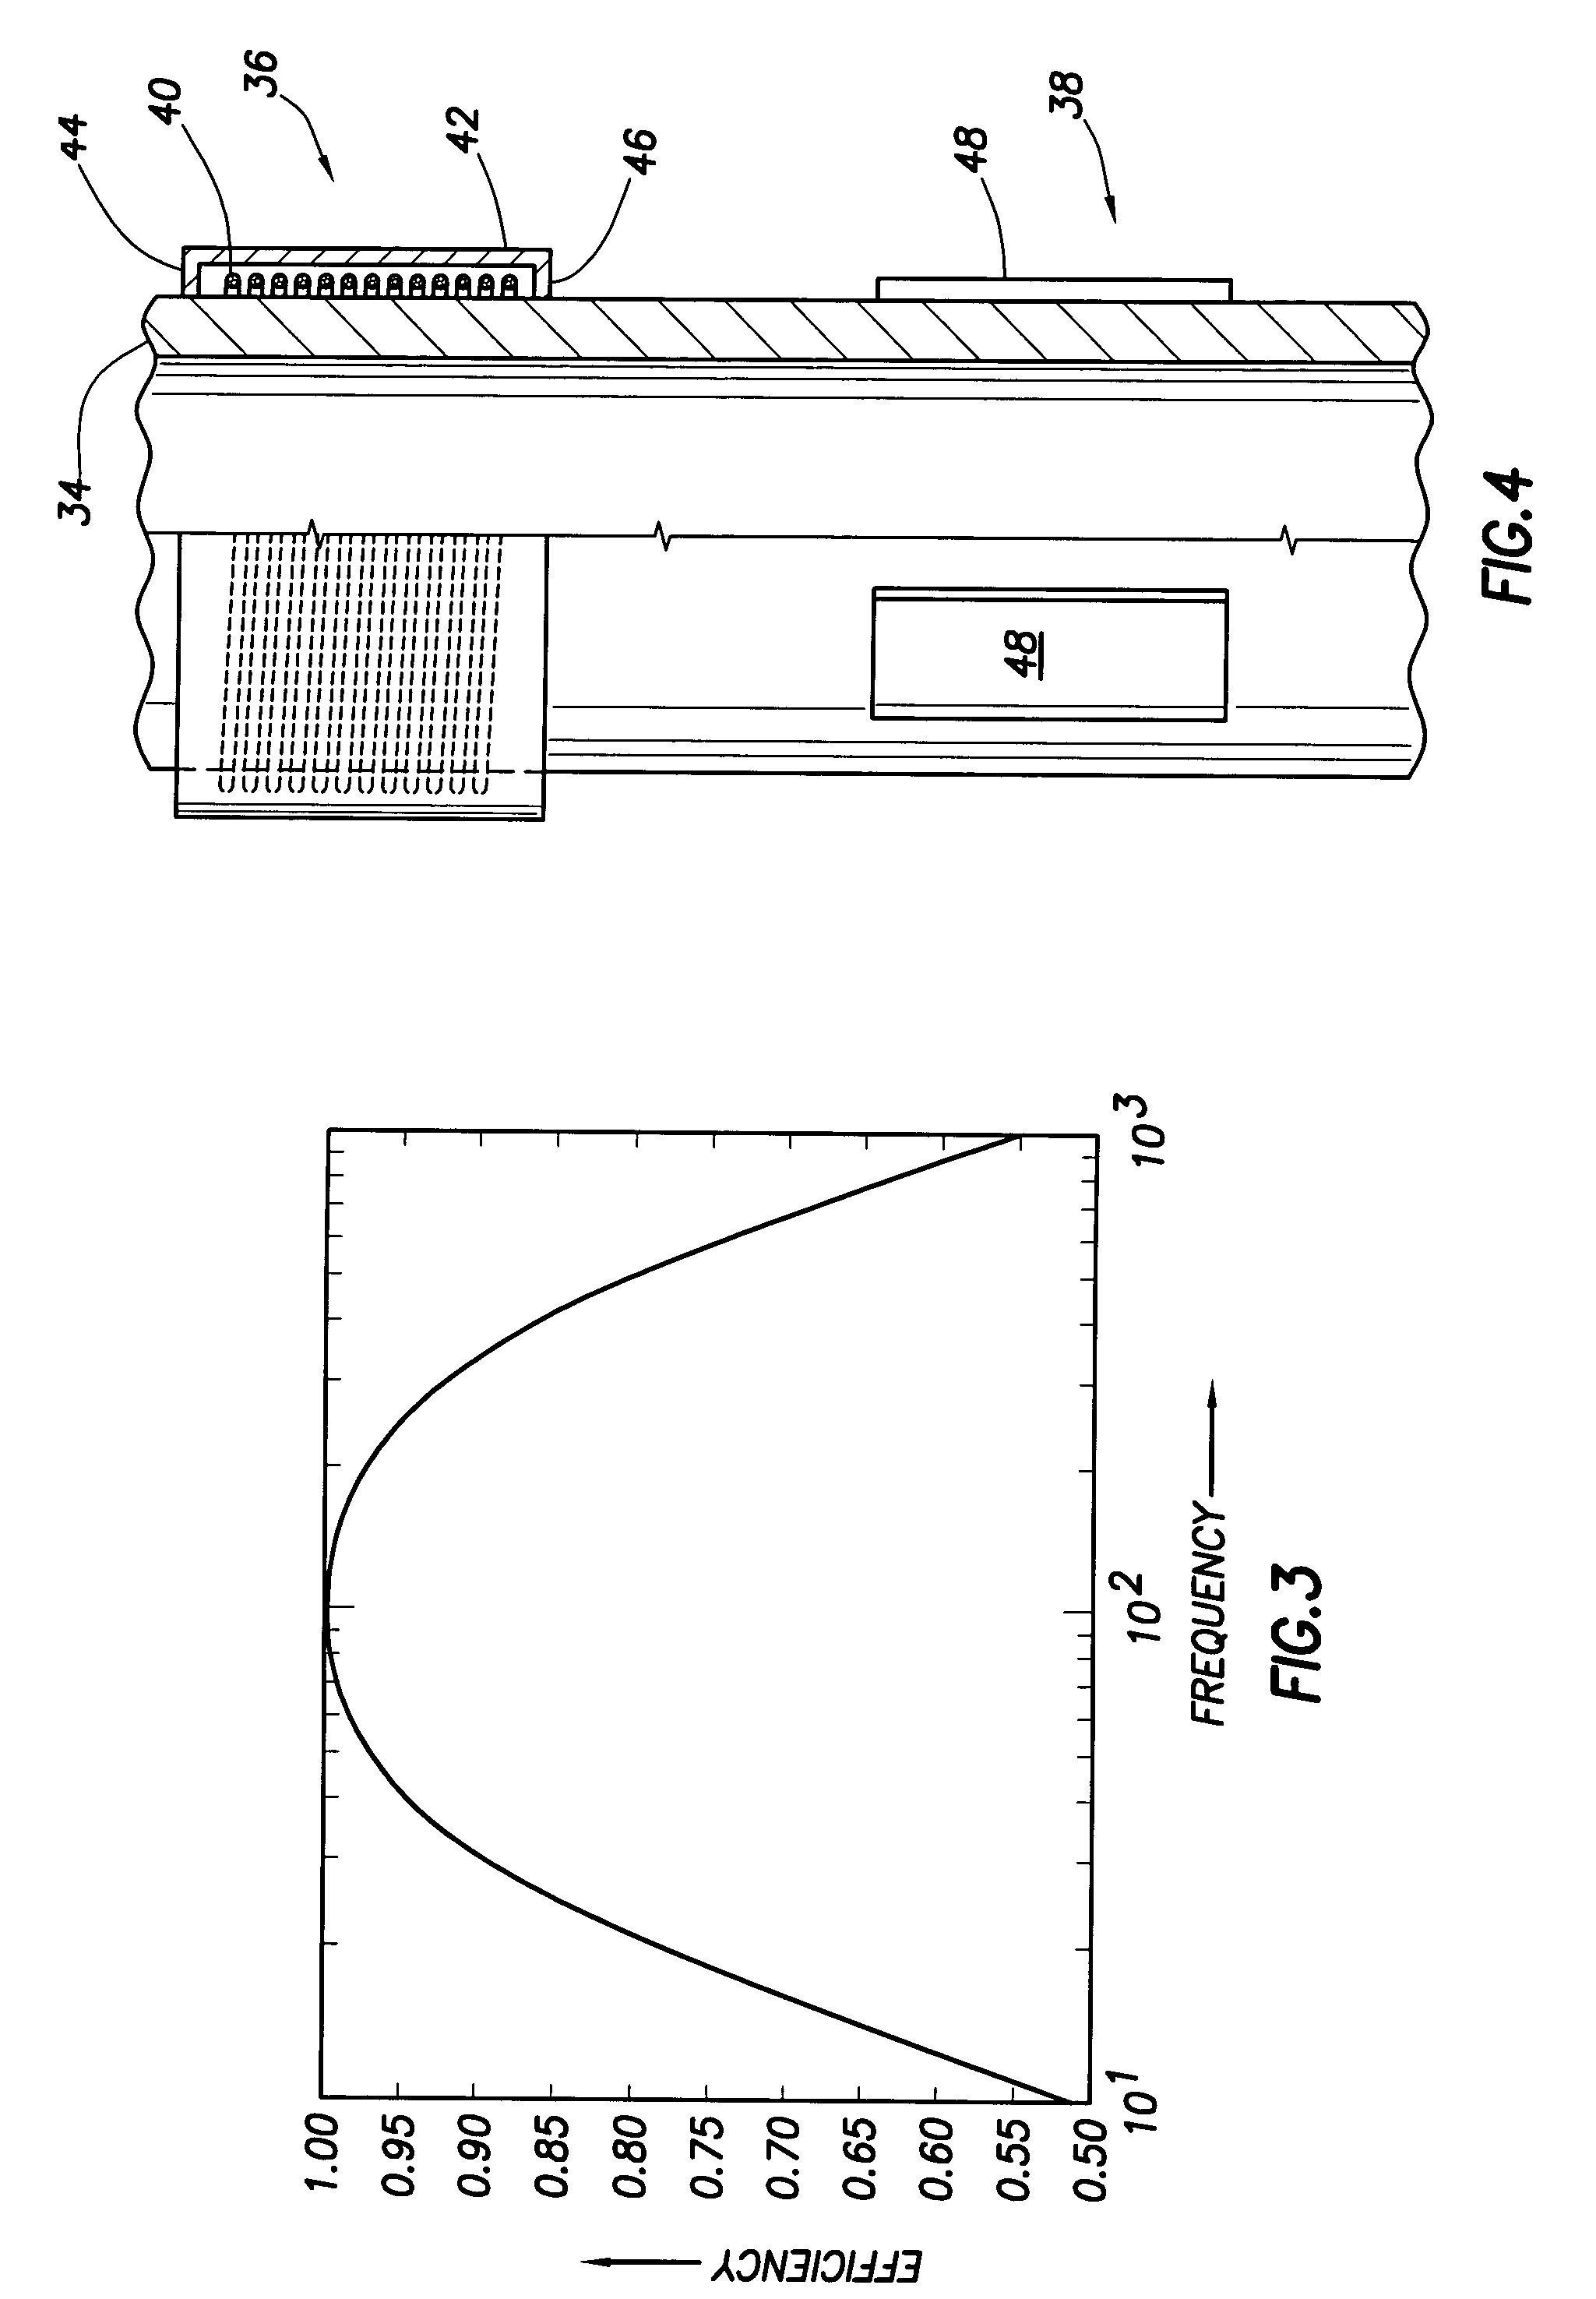 Hybrid piezoelectric and magnetostrictive actuator